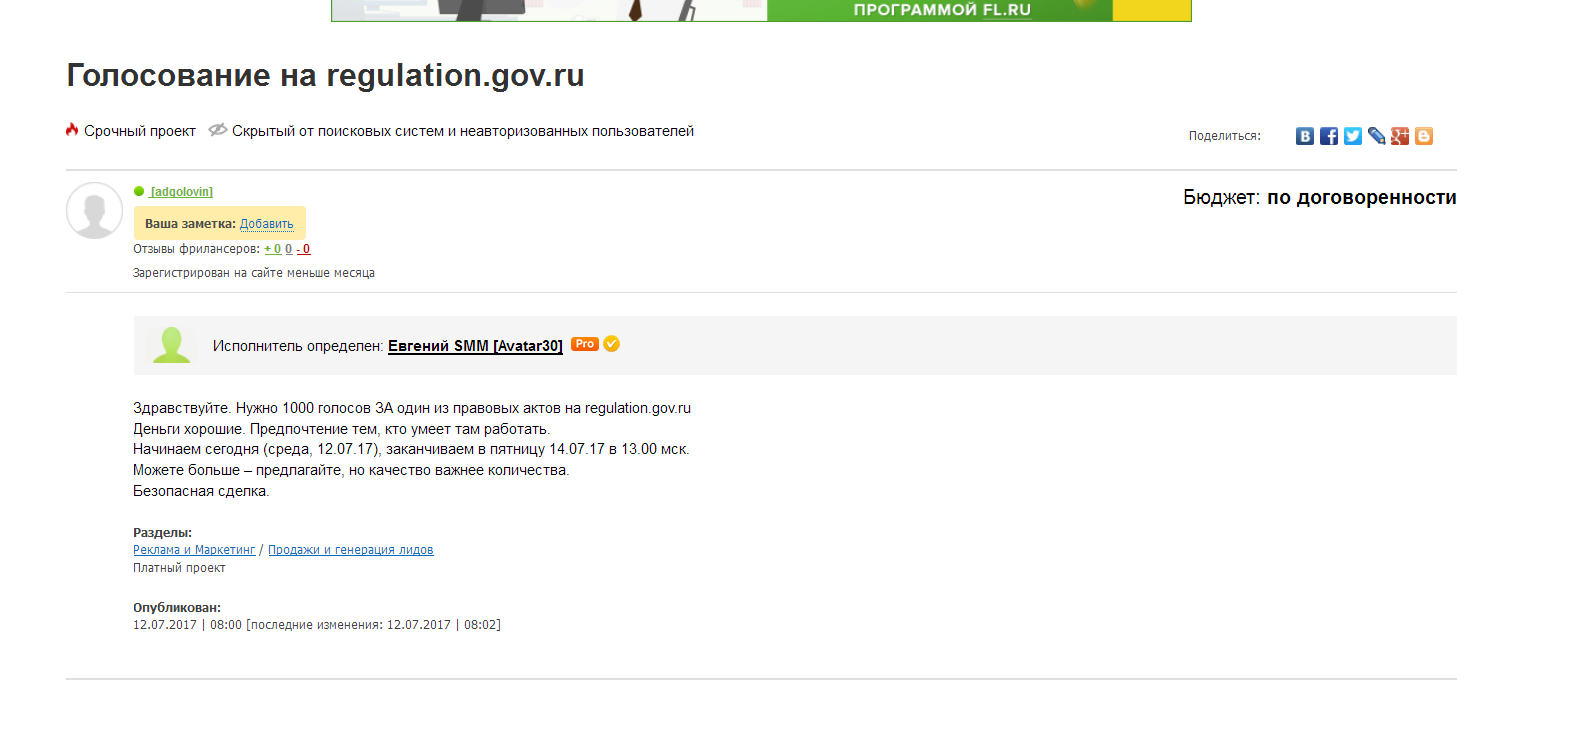 How are voting on regulation.gov.ru going today? - My, Vote, Elections, Candidates, Freelance, Russia